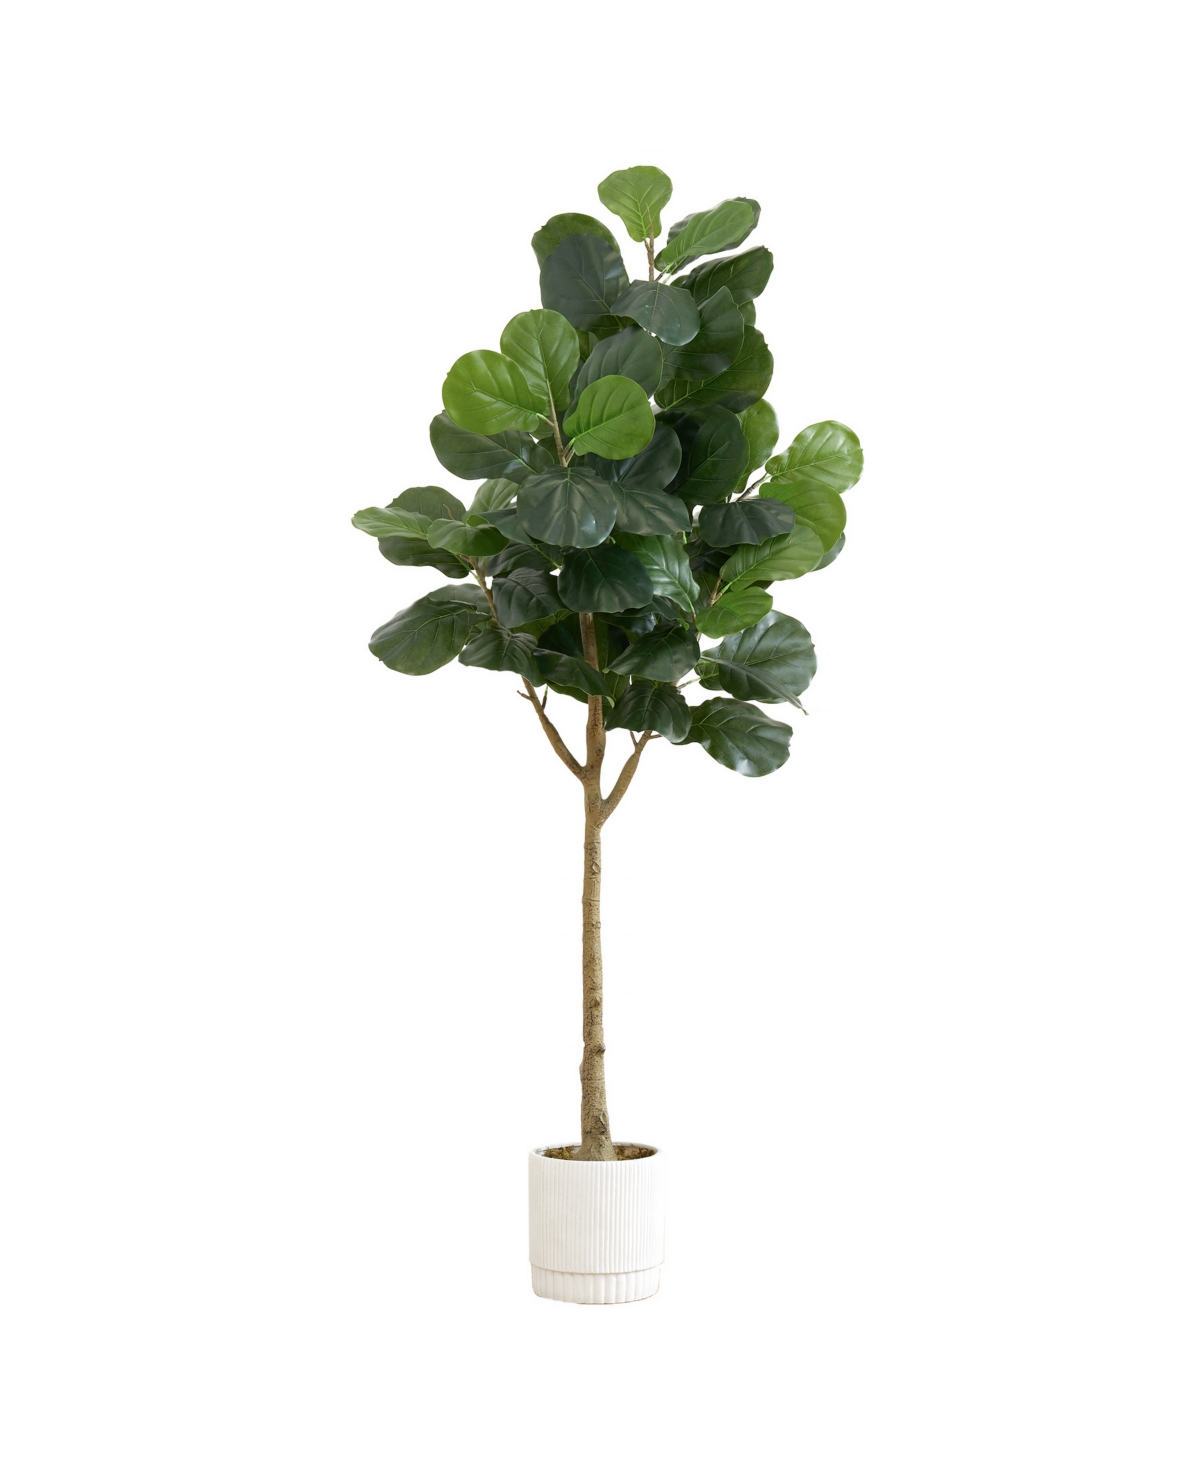 72" Artificial Fiddle Leaf Fig Tree with Decorative Planter - Green